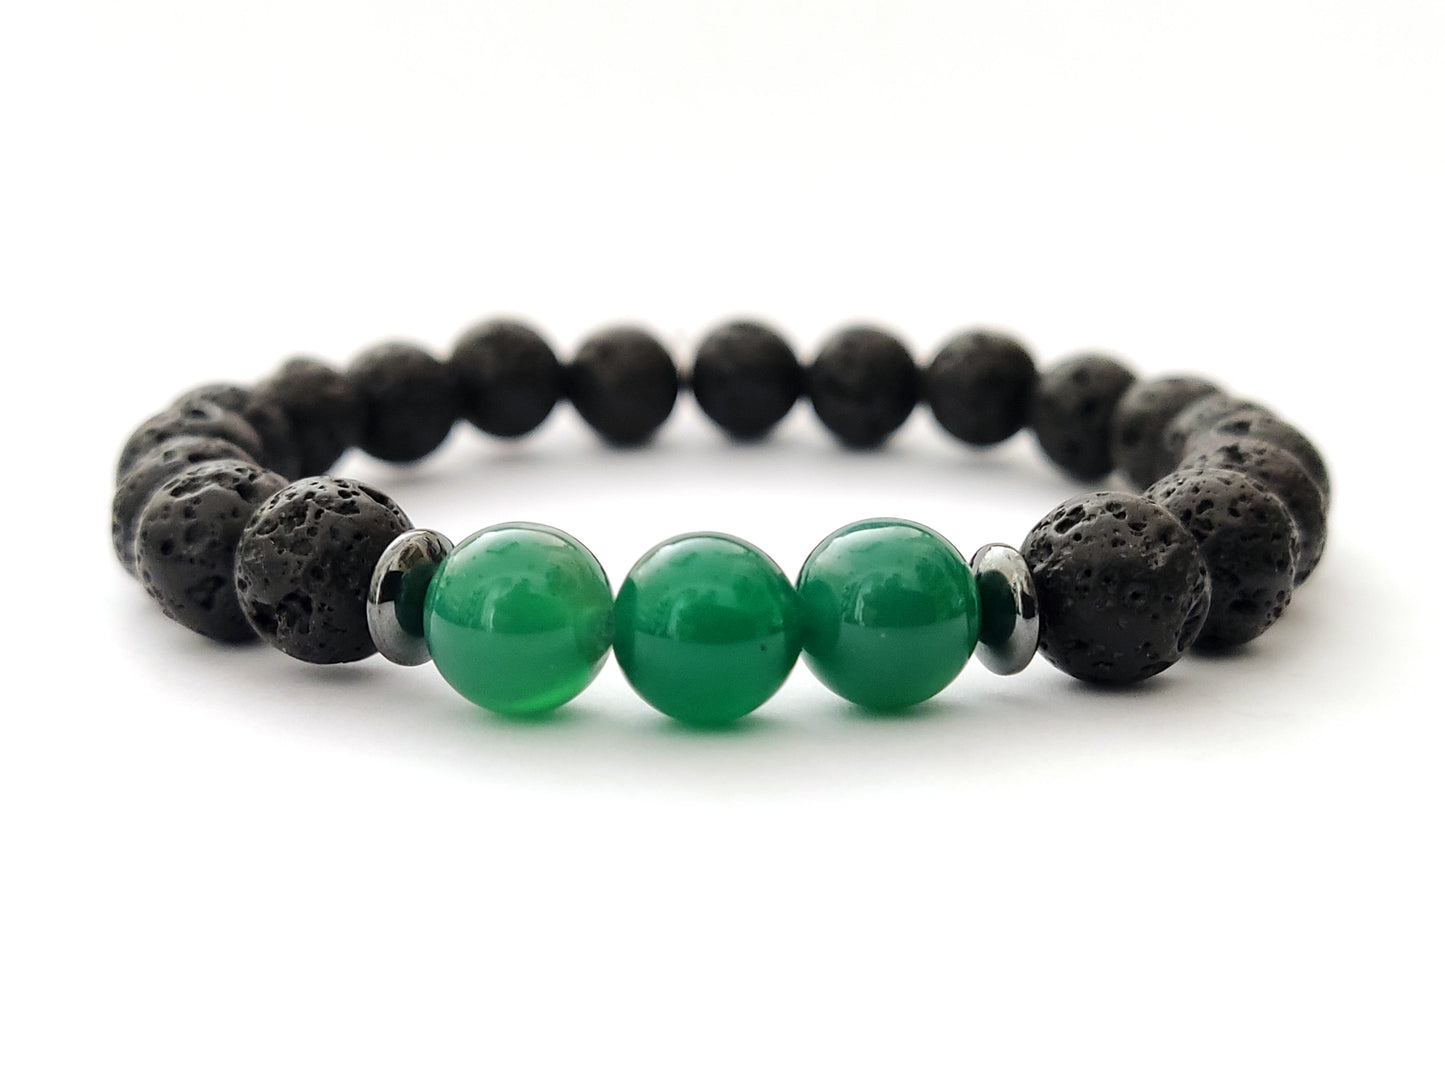 Greek volcanic lava bracelet with 3 pieces of green agate in the middle measuring 8mm on white background.